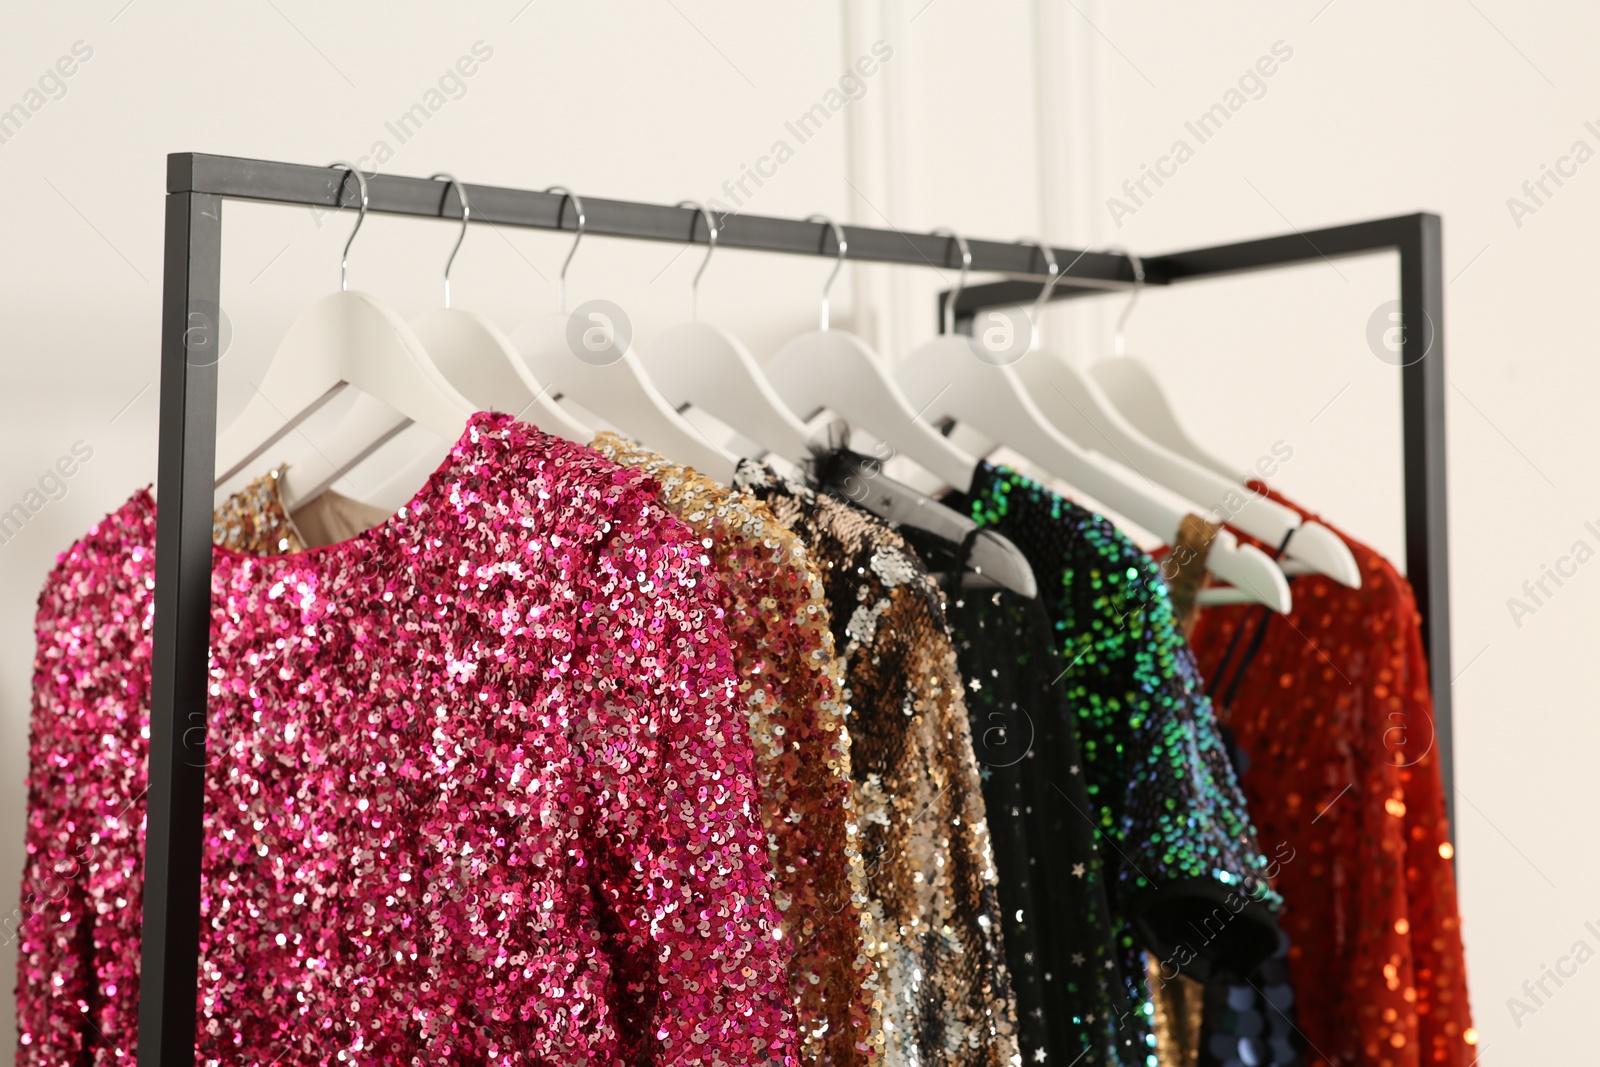 Photo of Clothing rack with colorful sequin party dresses on hangers near white wall indoors, closeup